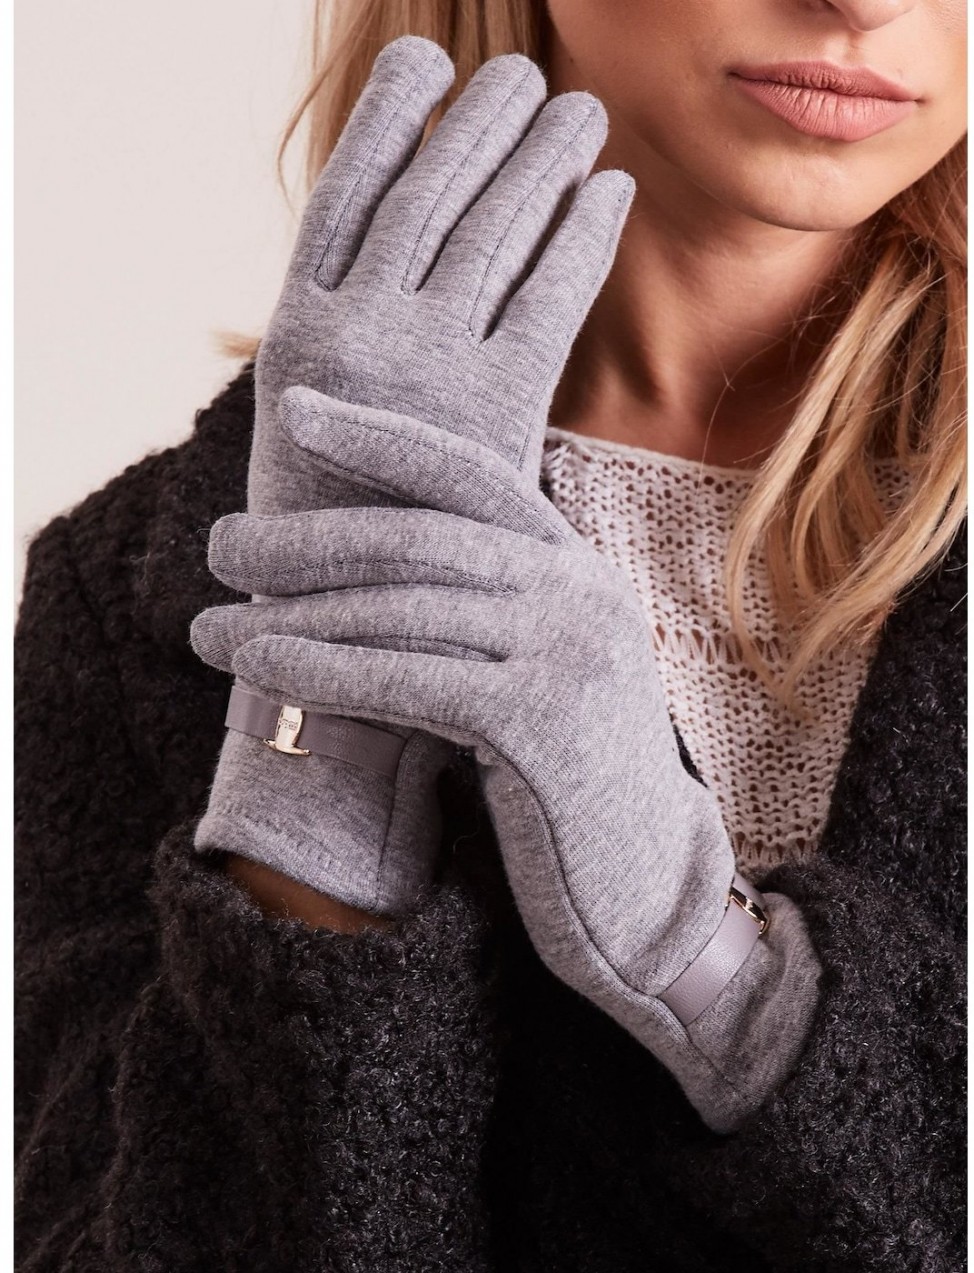 Classic grey gloves